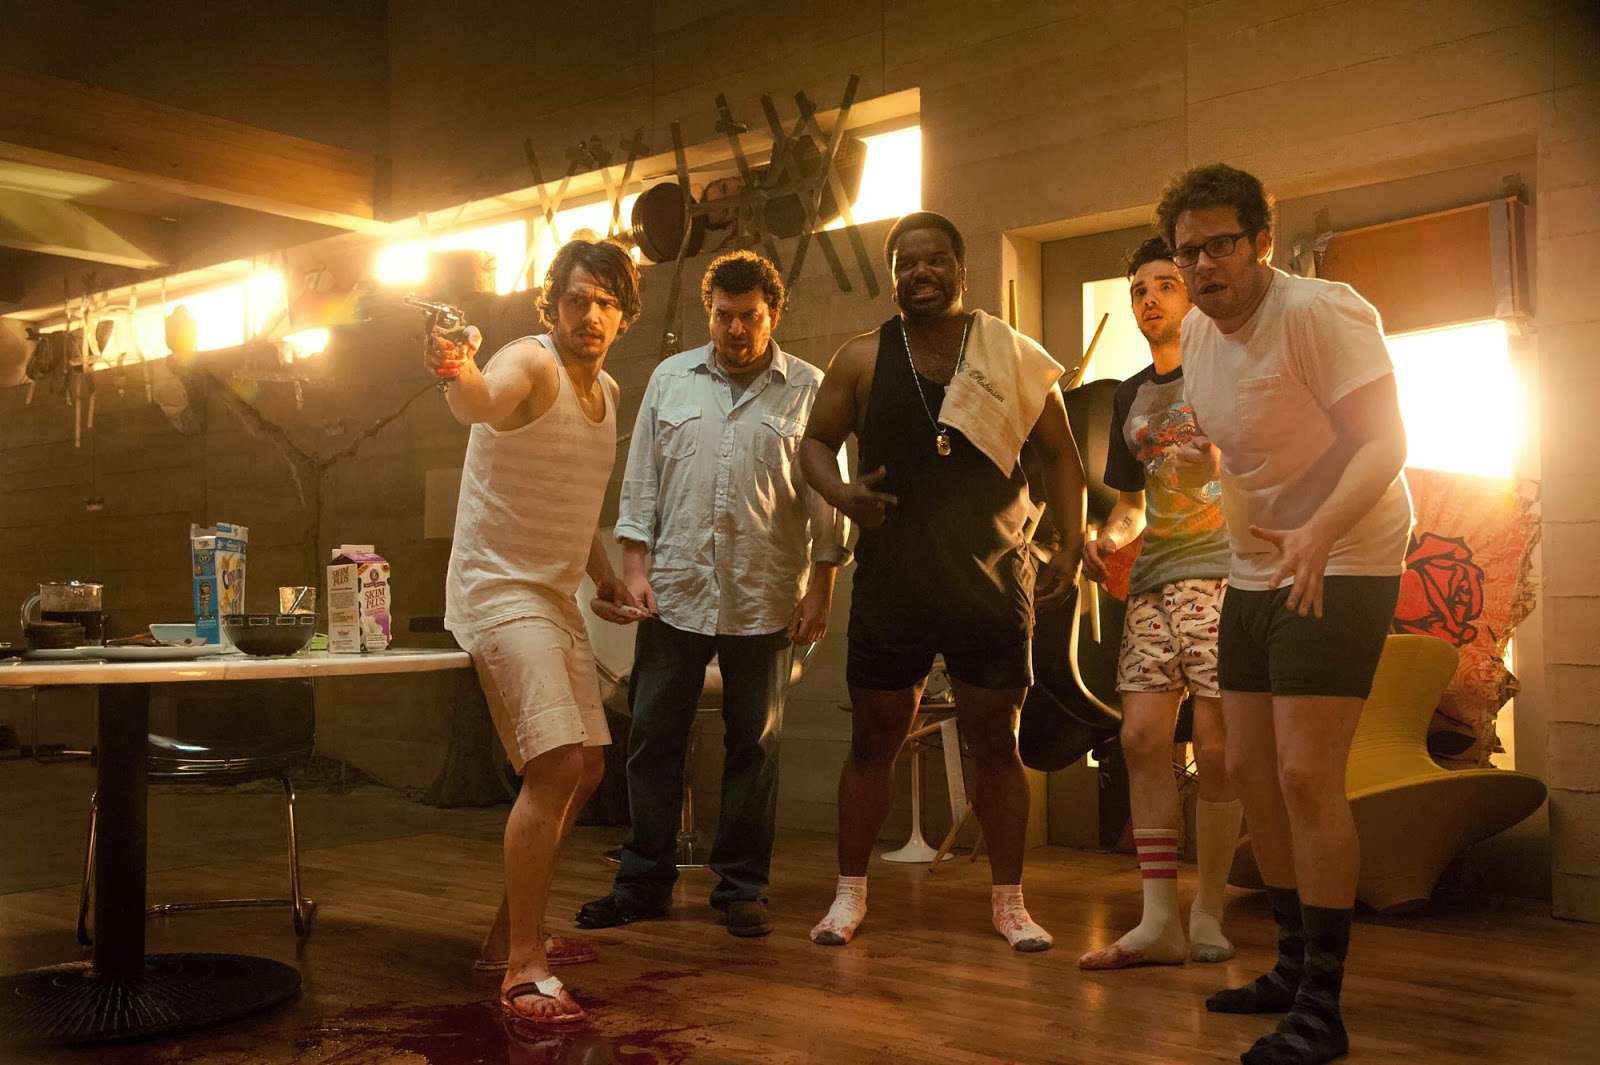 Facing the Biblical end of the world - James Franco, Danny McBride, Craig Robinson, Jay Baruchel and Seth Rogen in This is The End (2013)